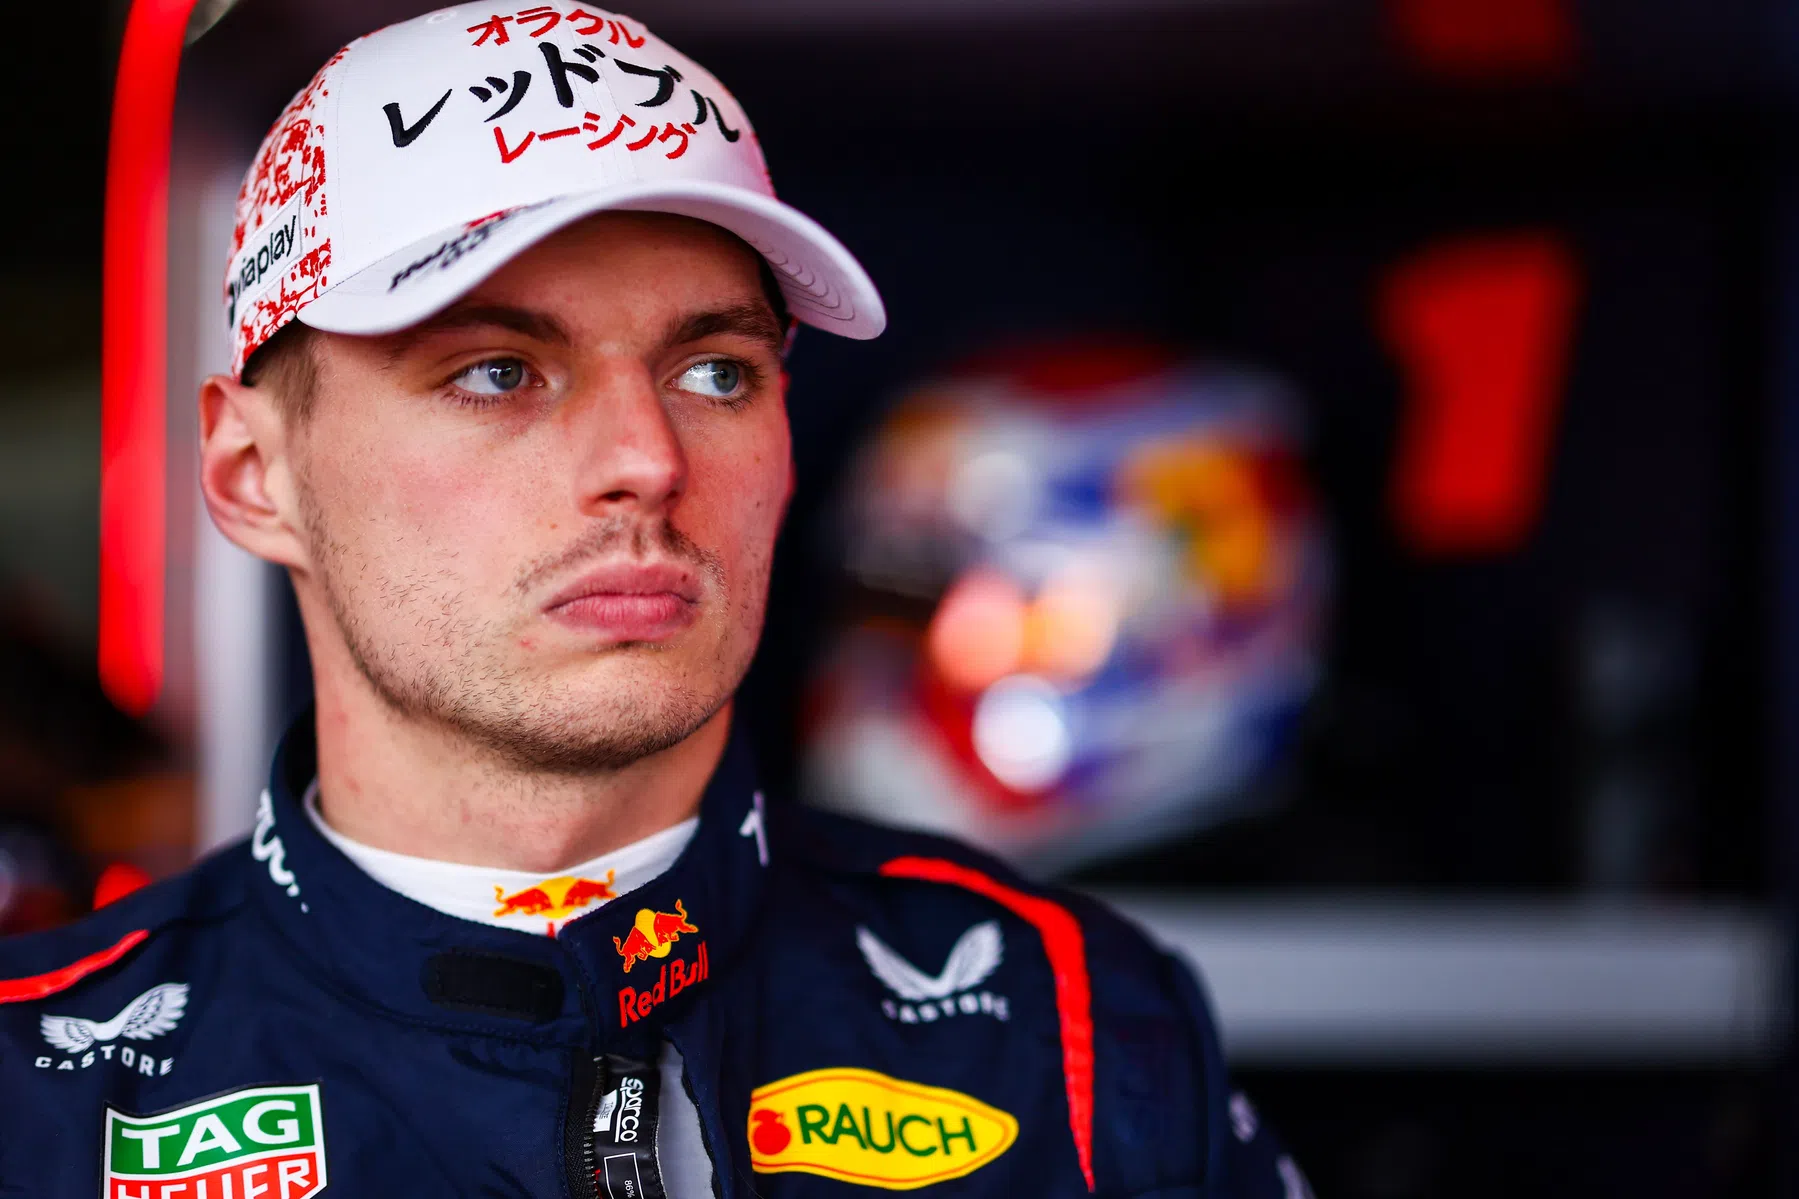 verstappen and perez respond to updates from red bull